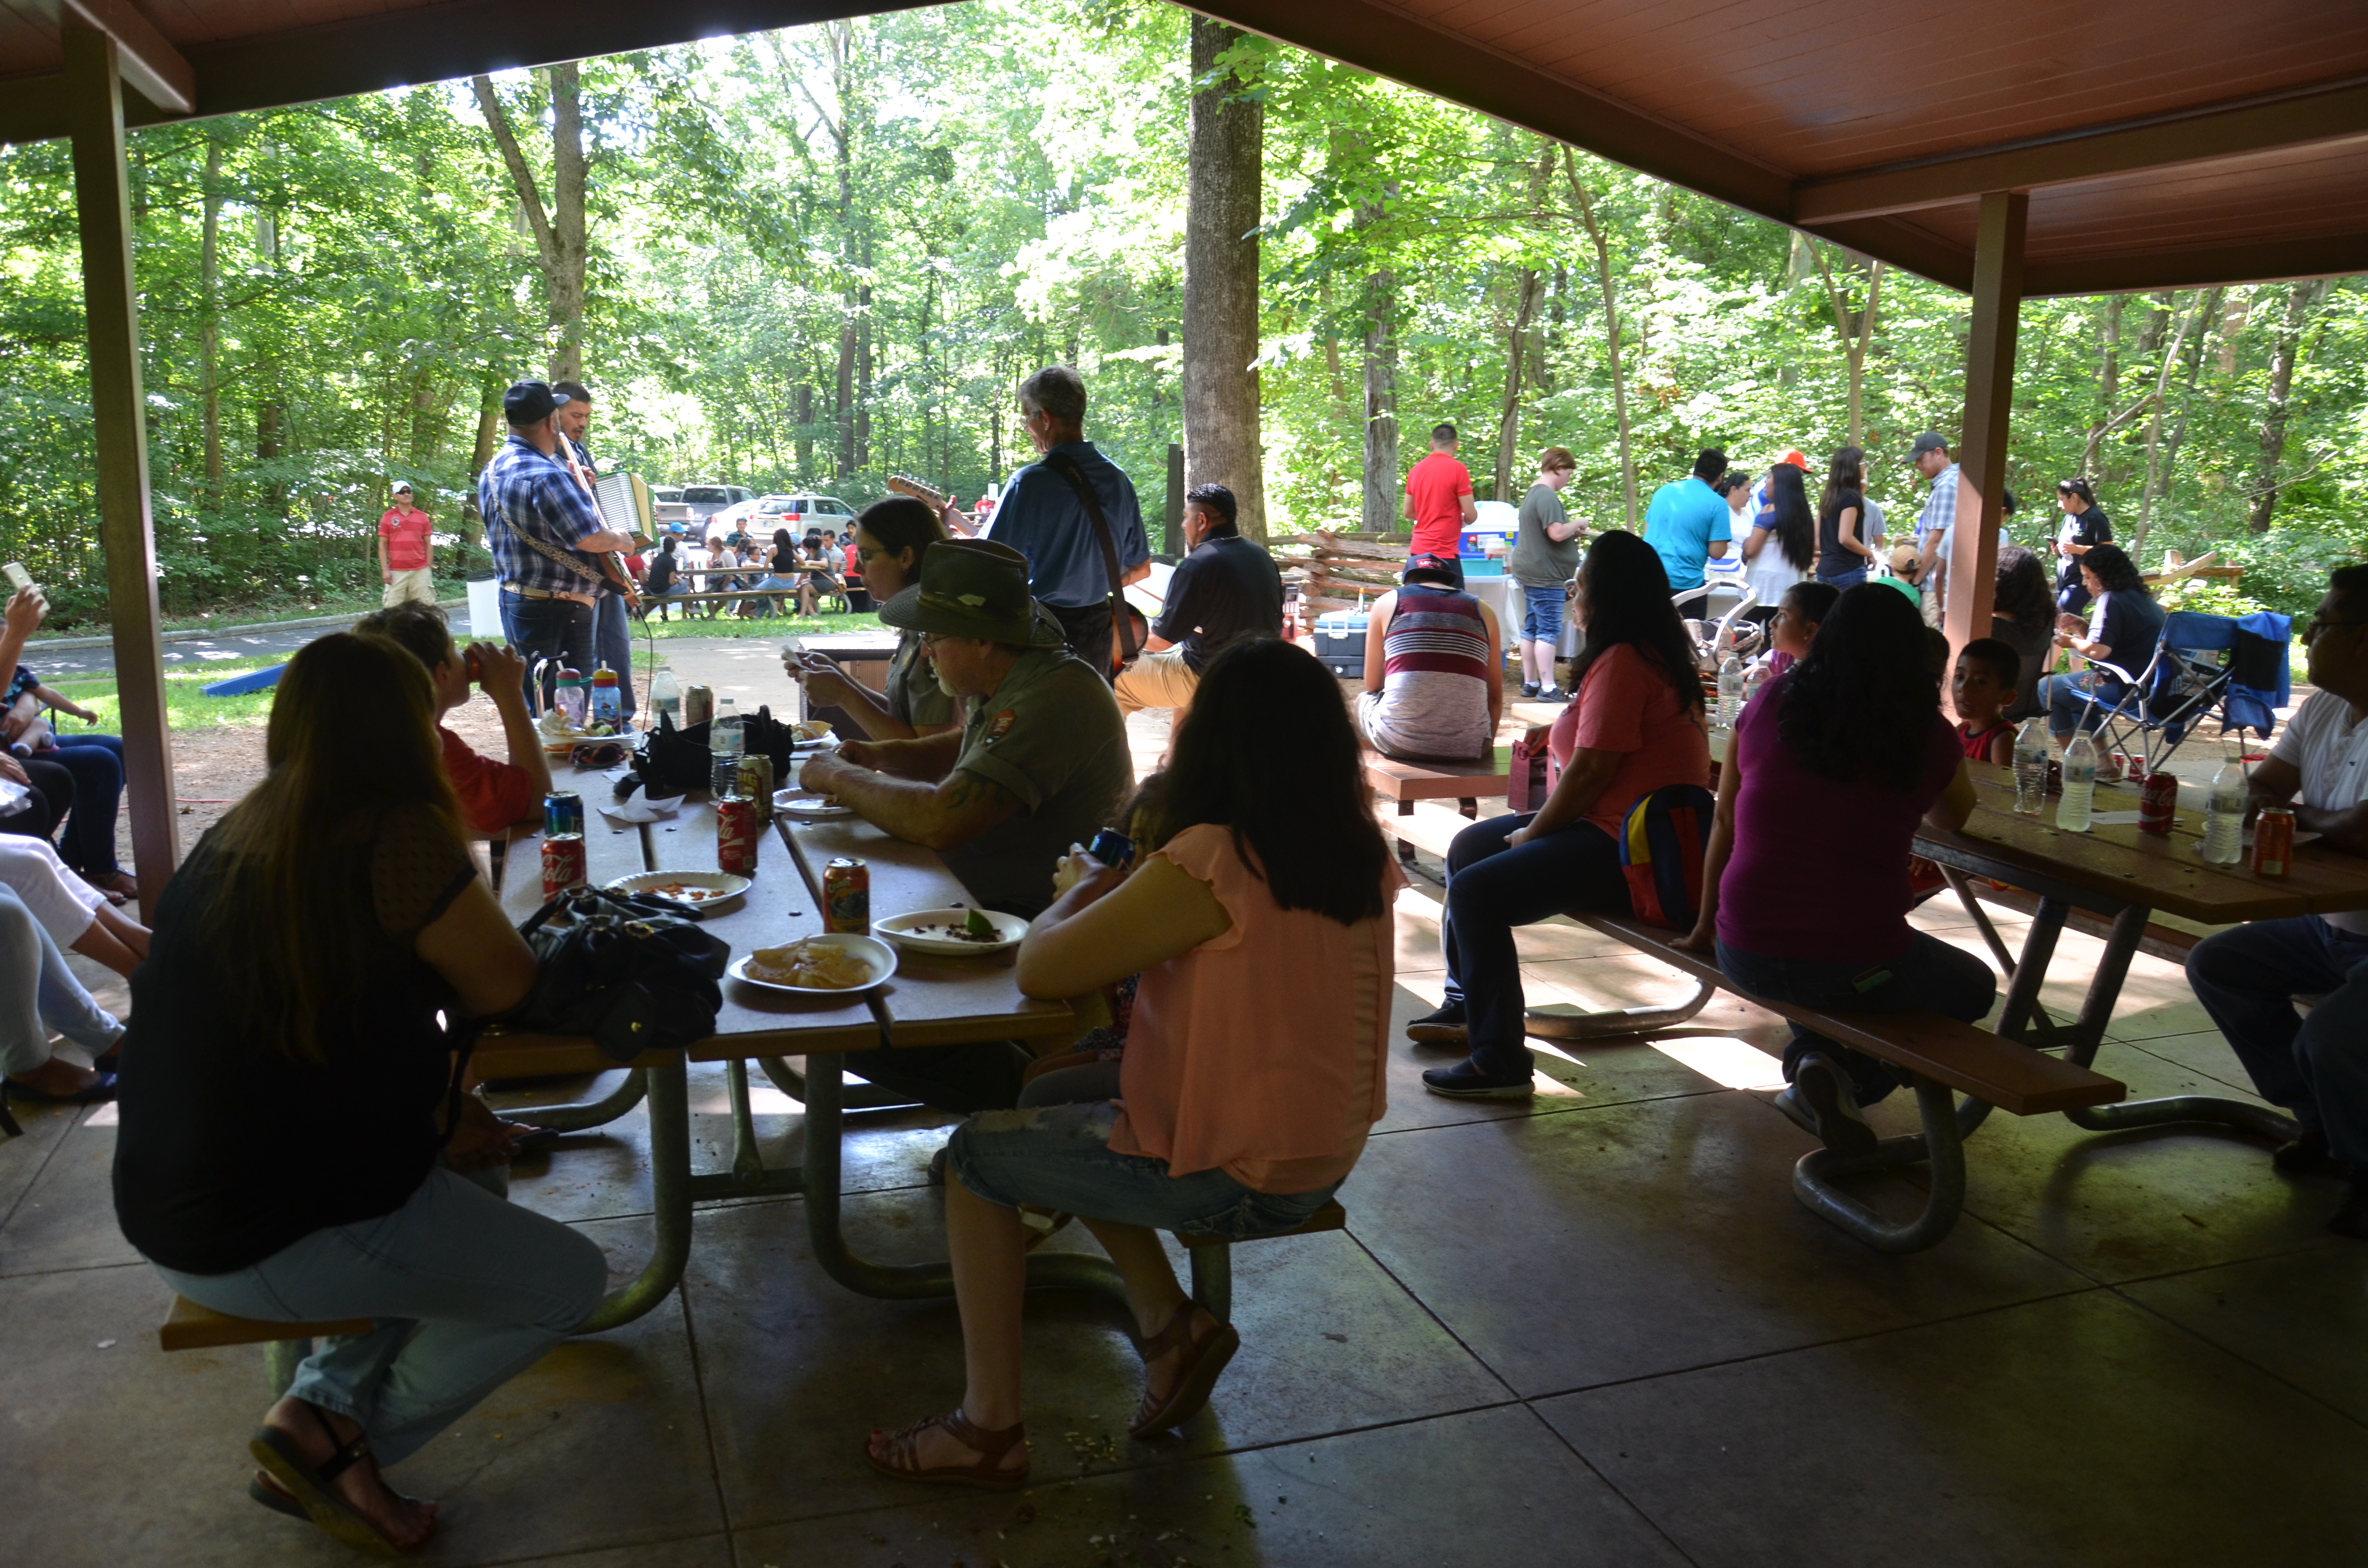 People enjoying food and music in park shelter during fiesta